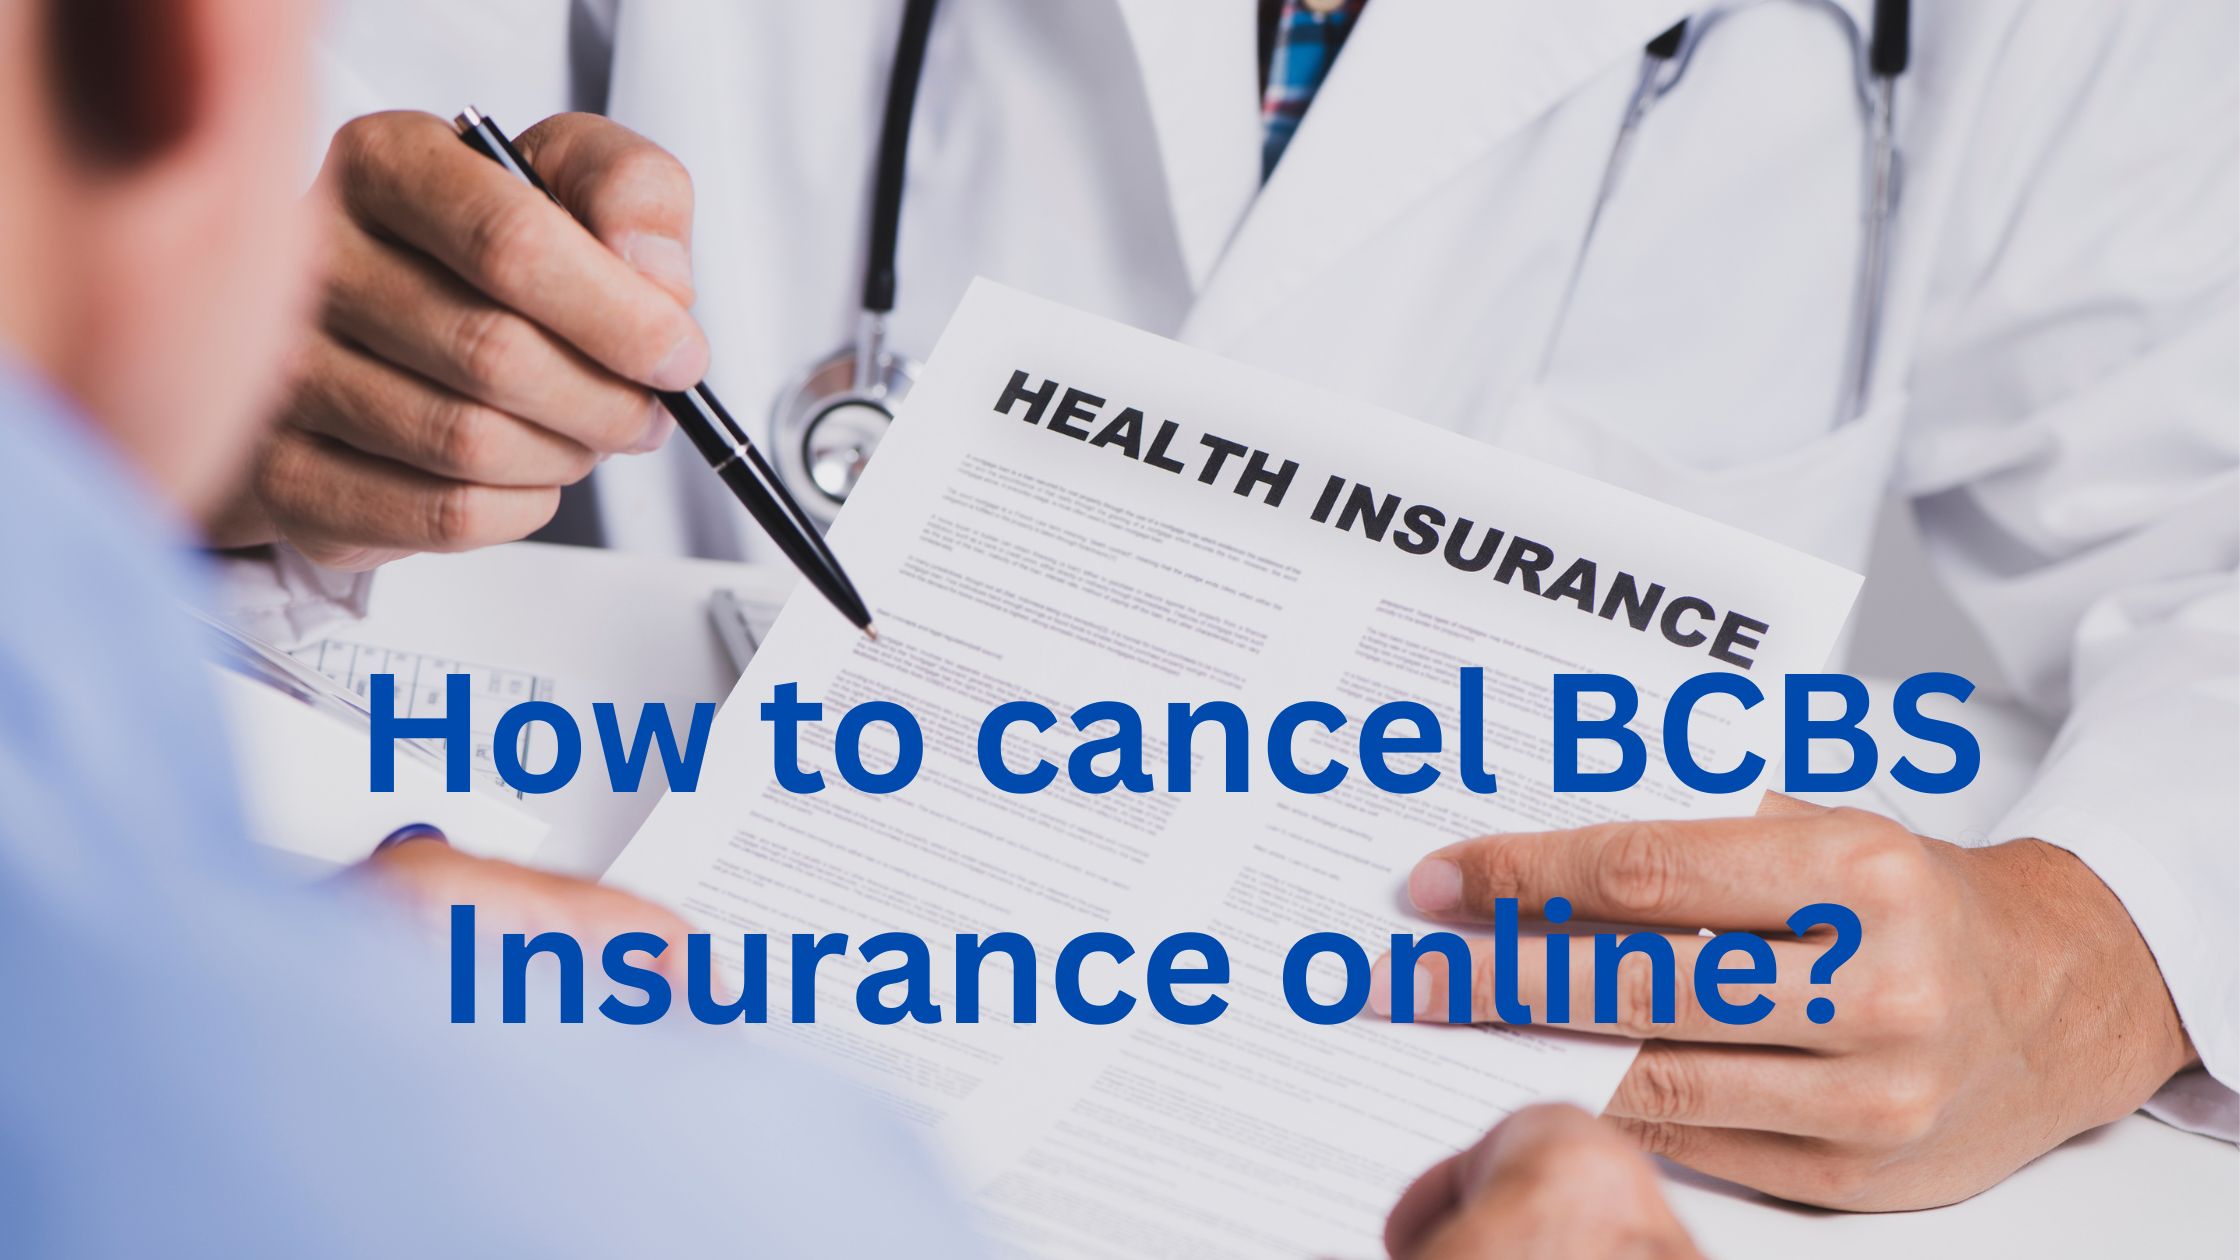 How to cancel BCBS insurance online